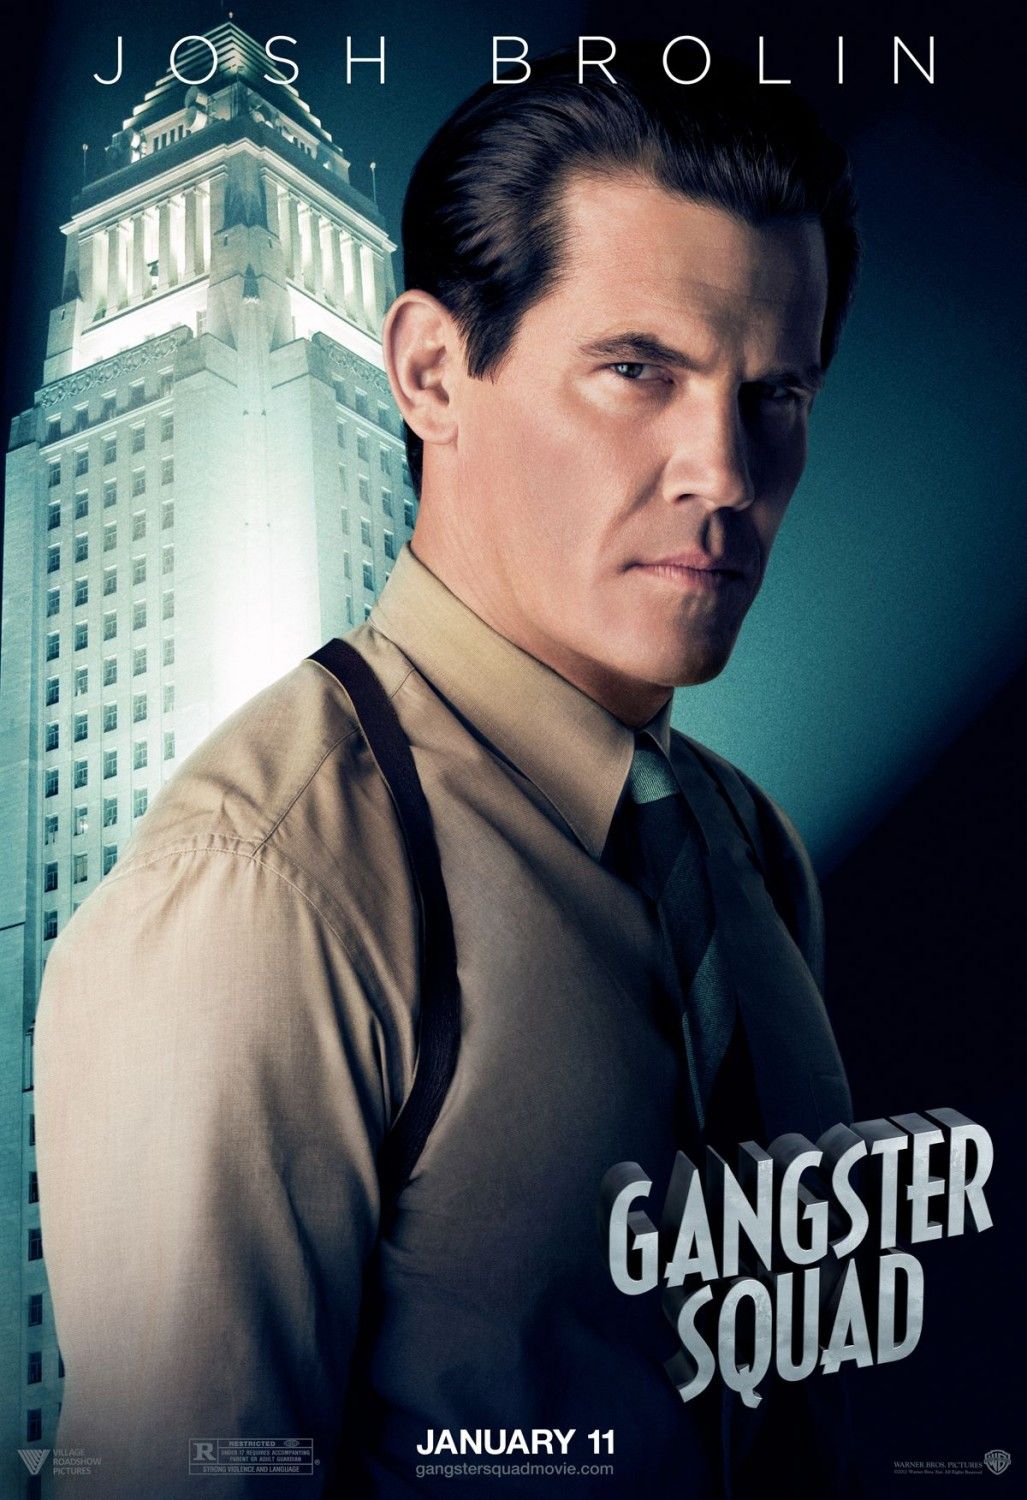 Gangster Squad Character Poster 2